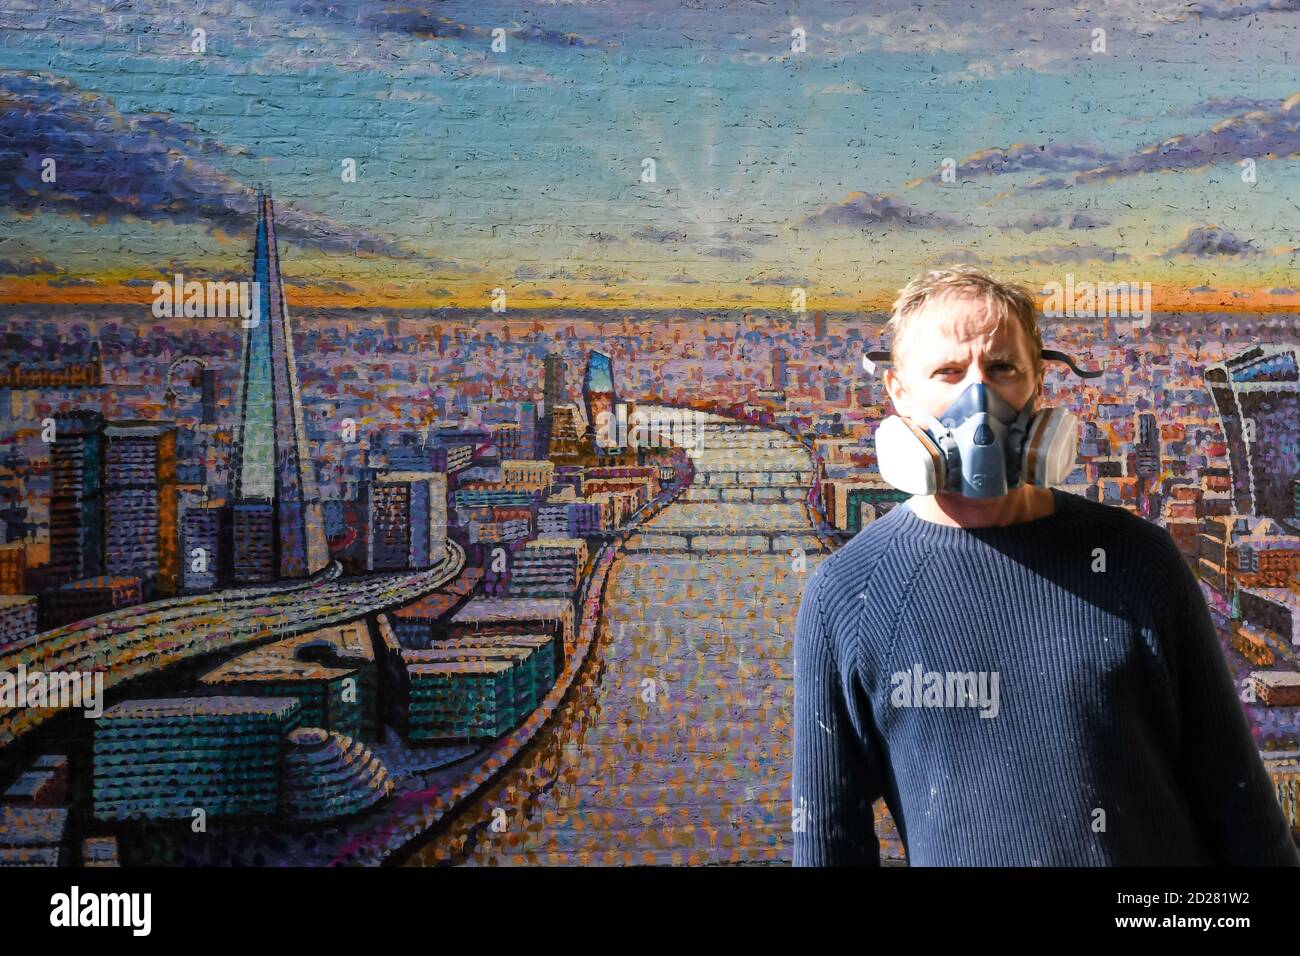 London cityscape mural by Jimmy C an artist supported by Network Rail. The piece emphasises the life, light and energy of London. This mural can be seen at Blackfriars station near the Thames. Stock Photo